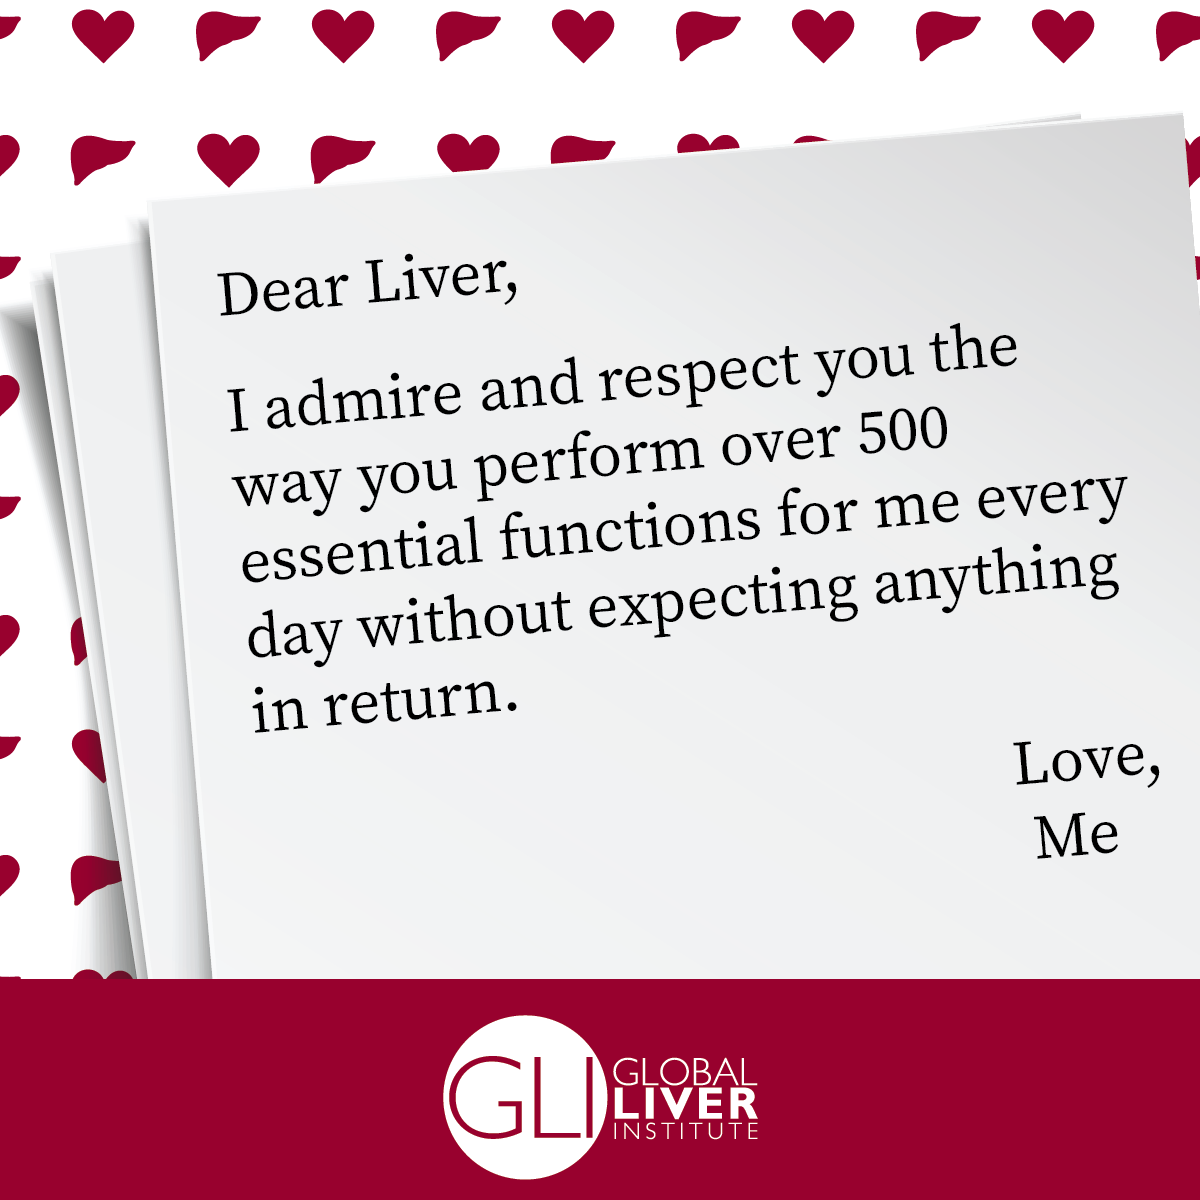 love-letter-to-liver10.png